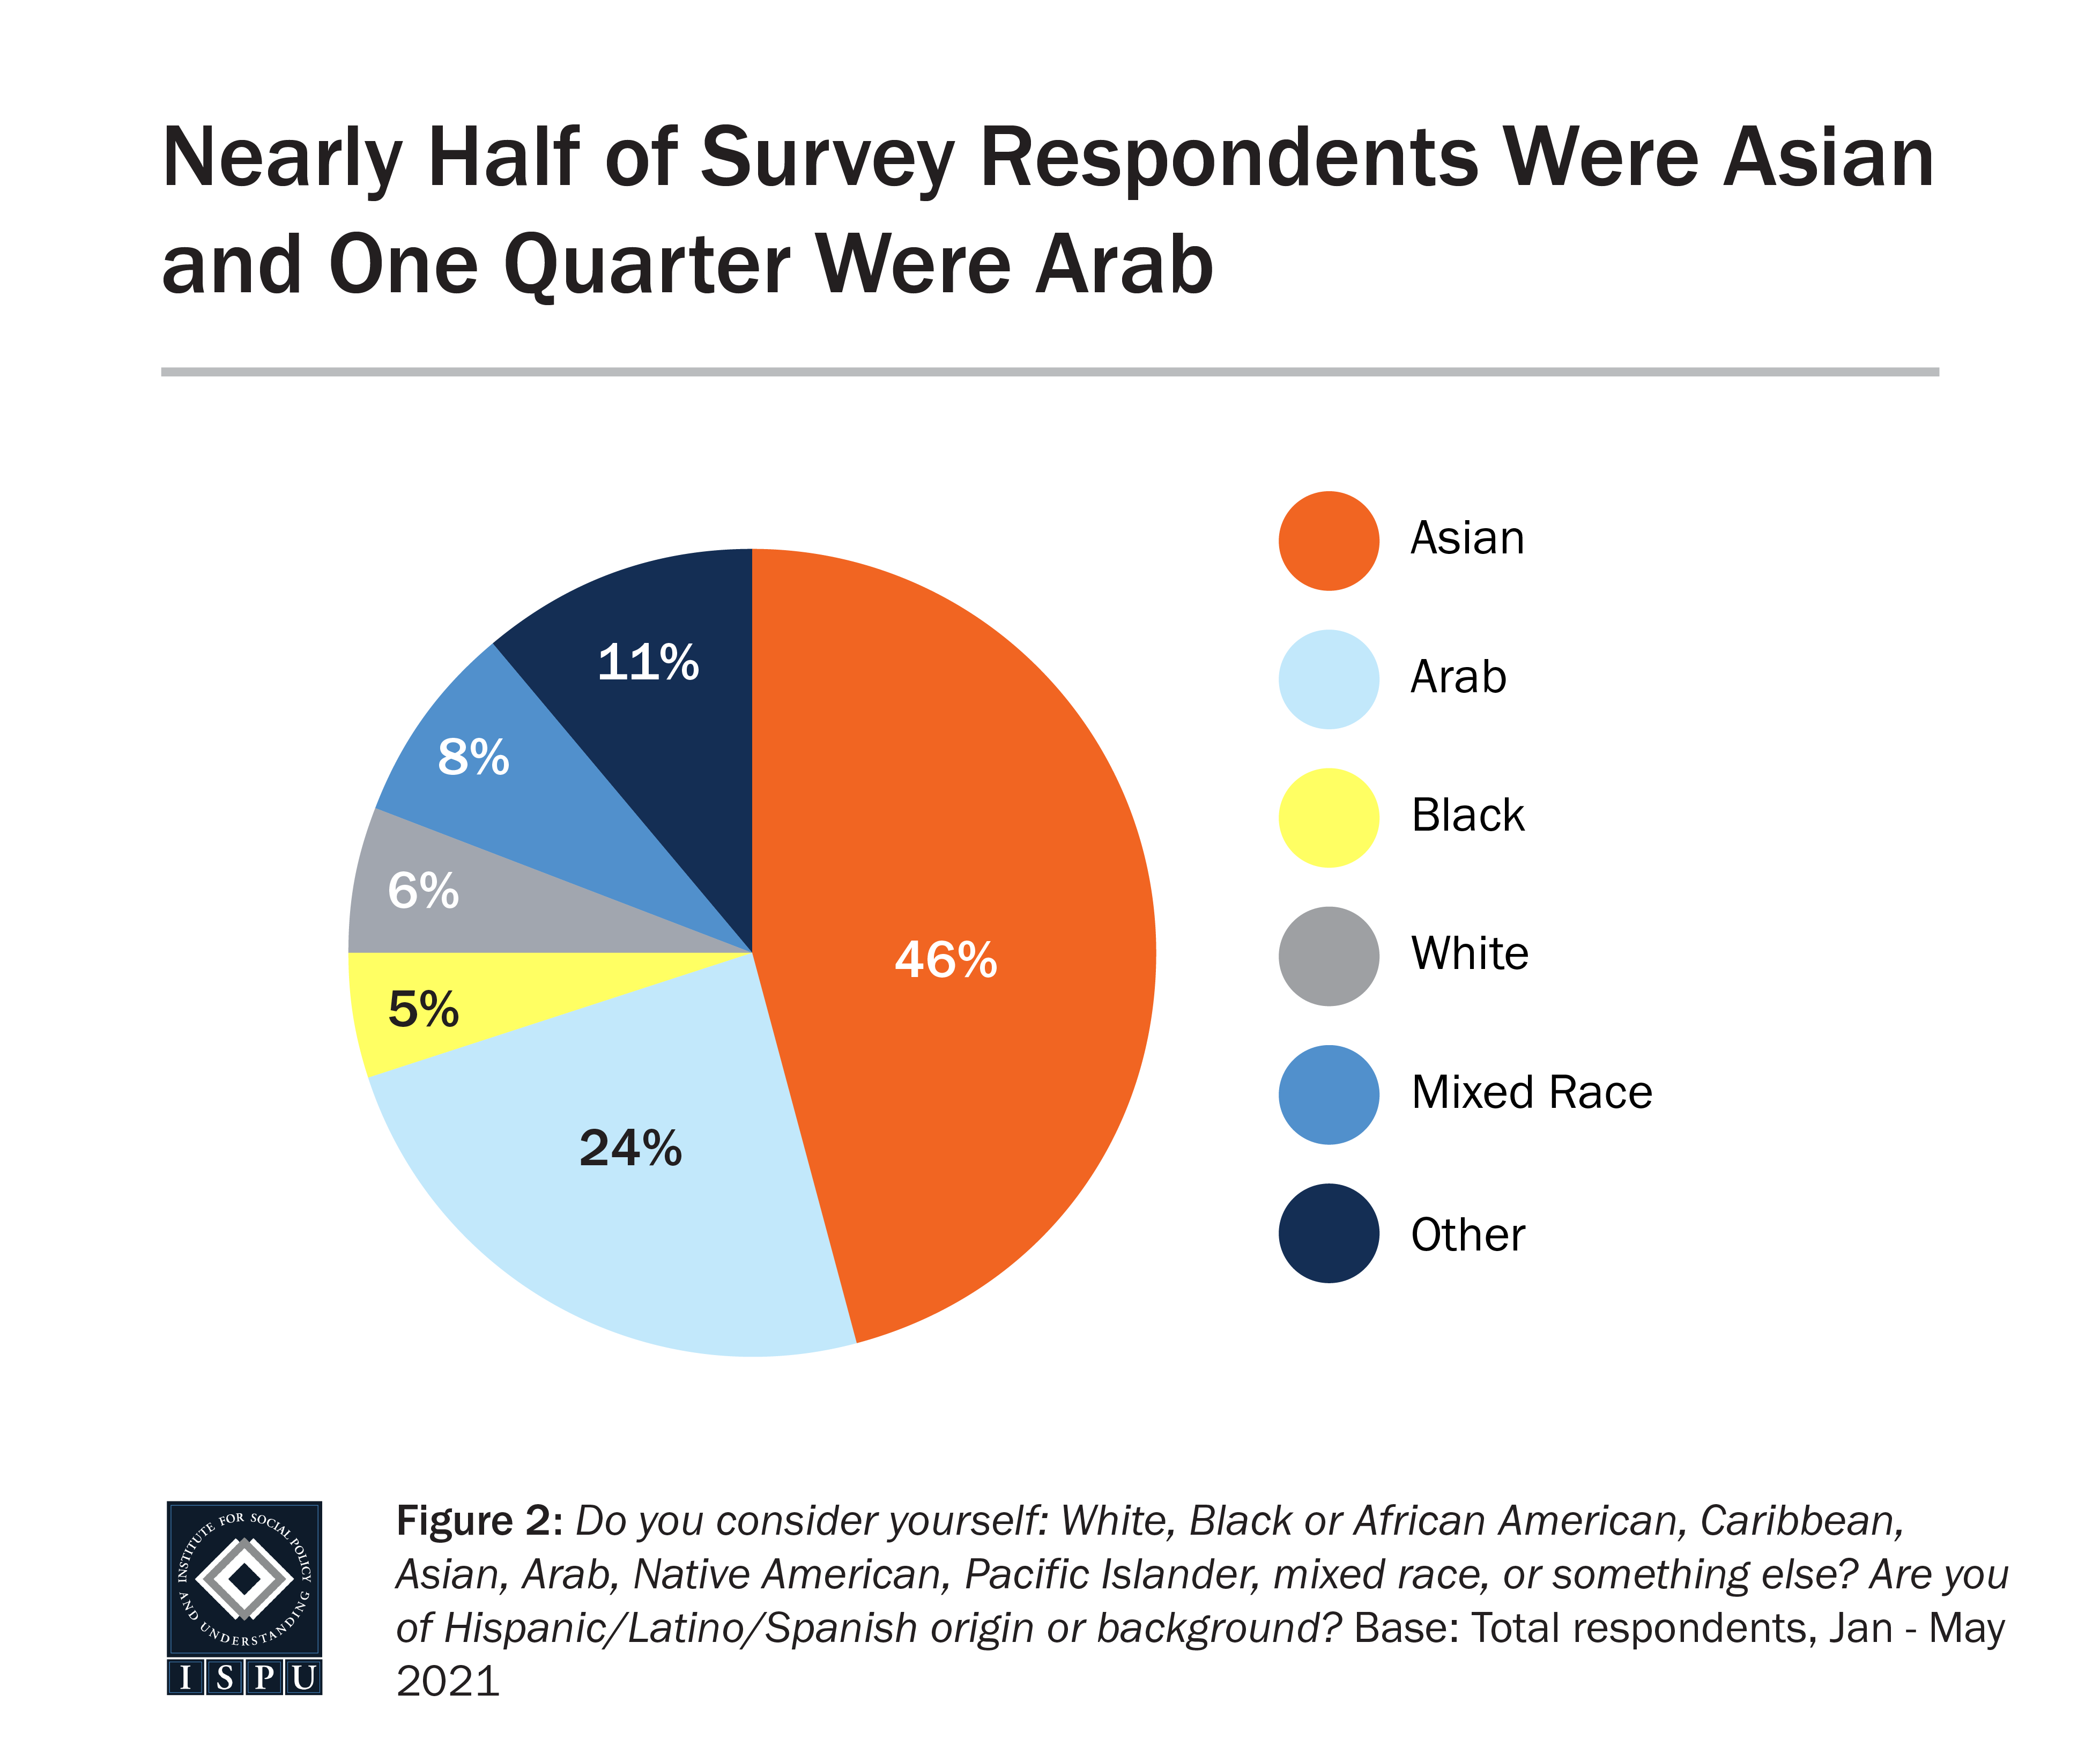 Graph displaying: pie chart showing nearly half of survey respondents were Asian and one quarter were Arab